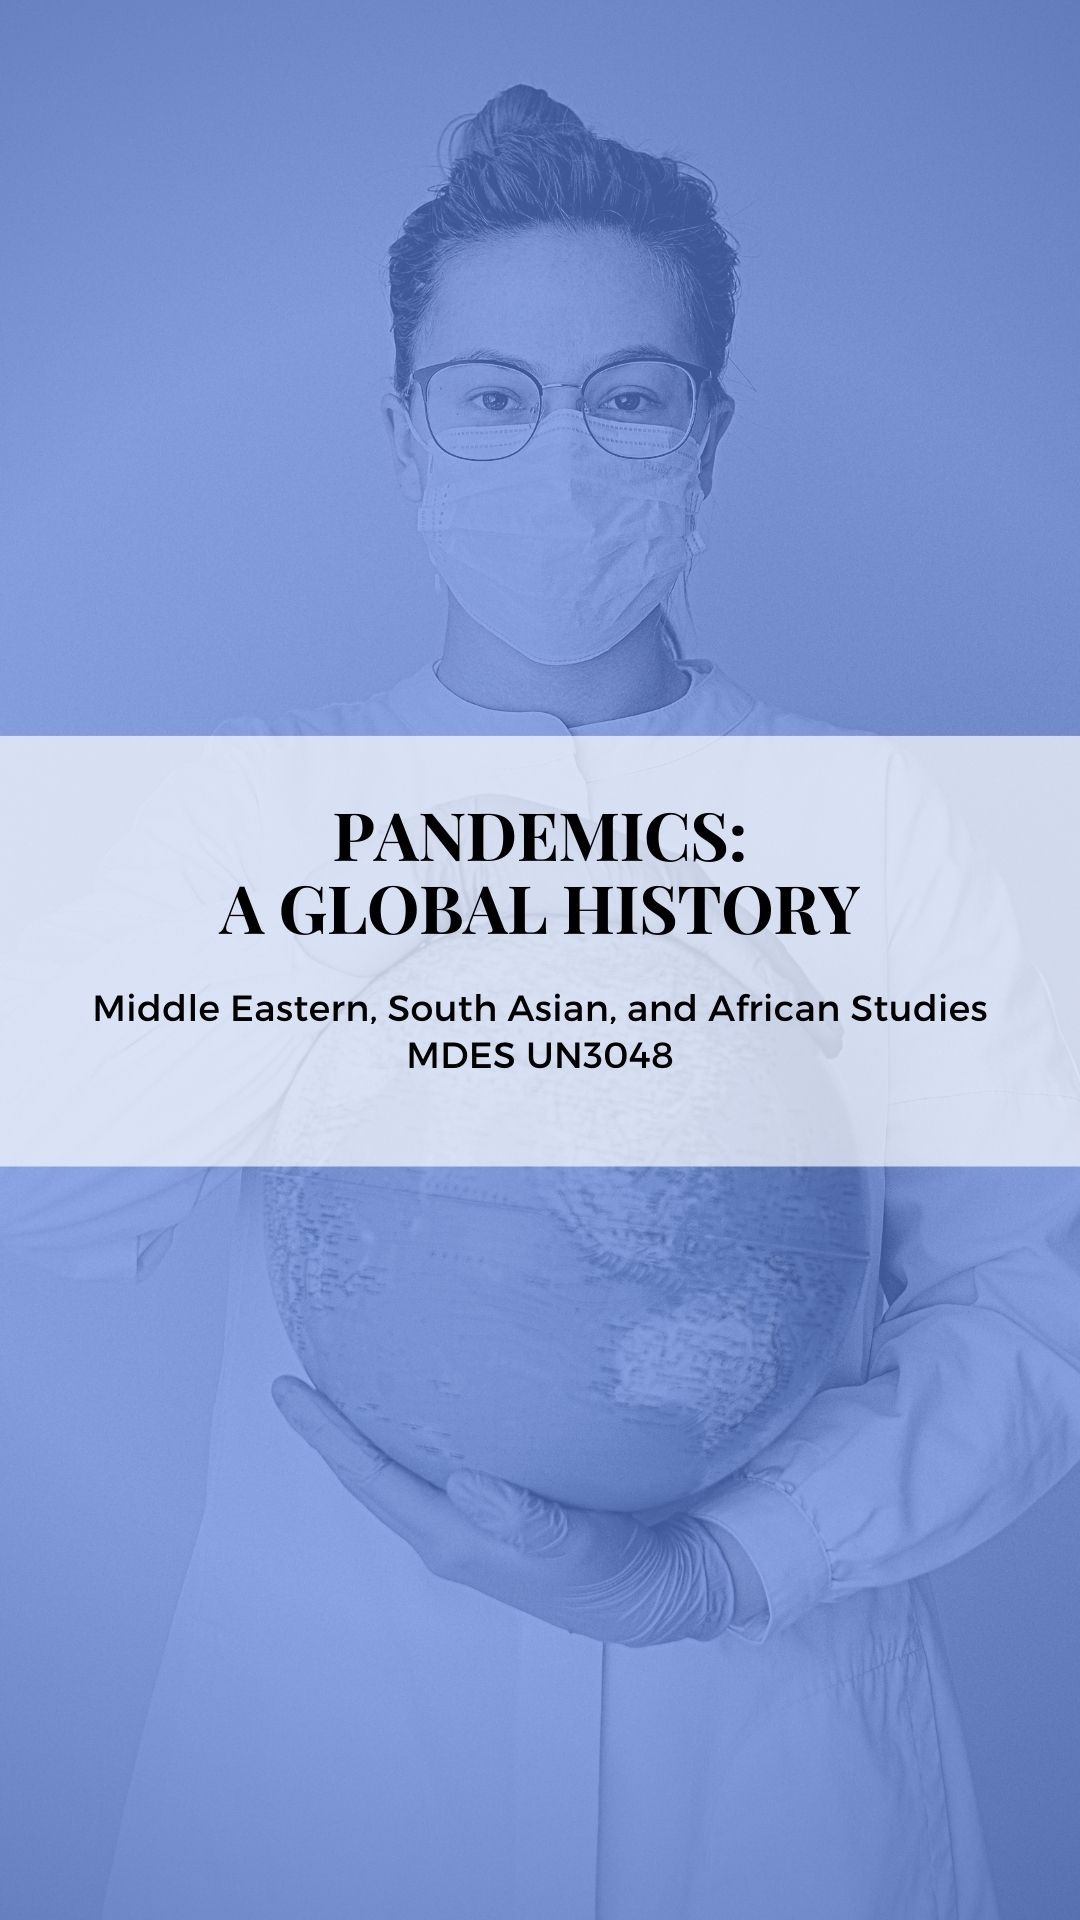 Spring 2021 course Pandemics: A Global History; course number HIST UN2952